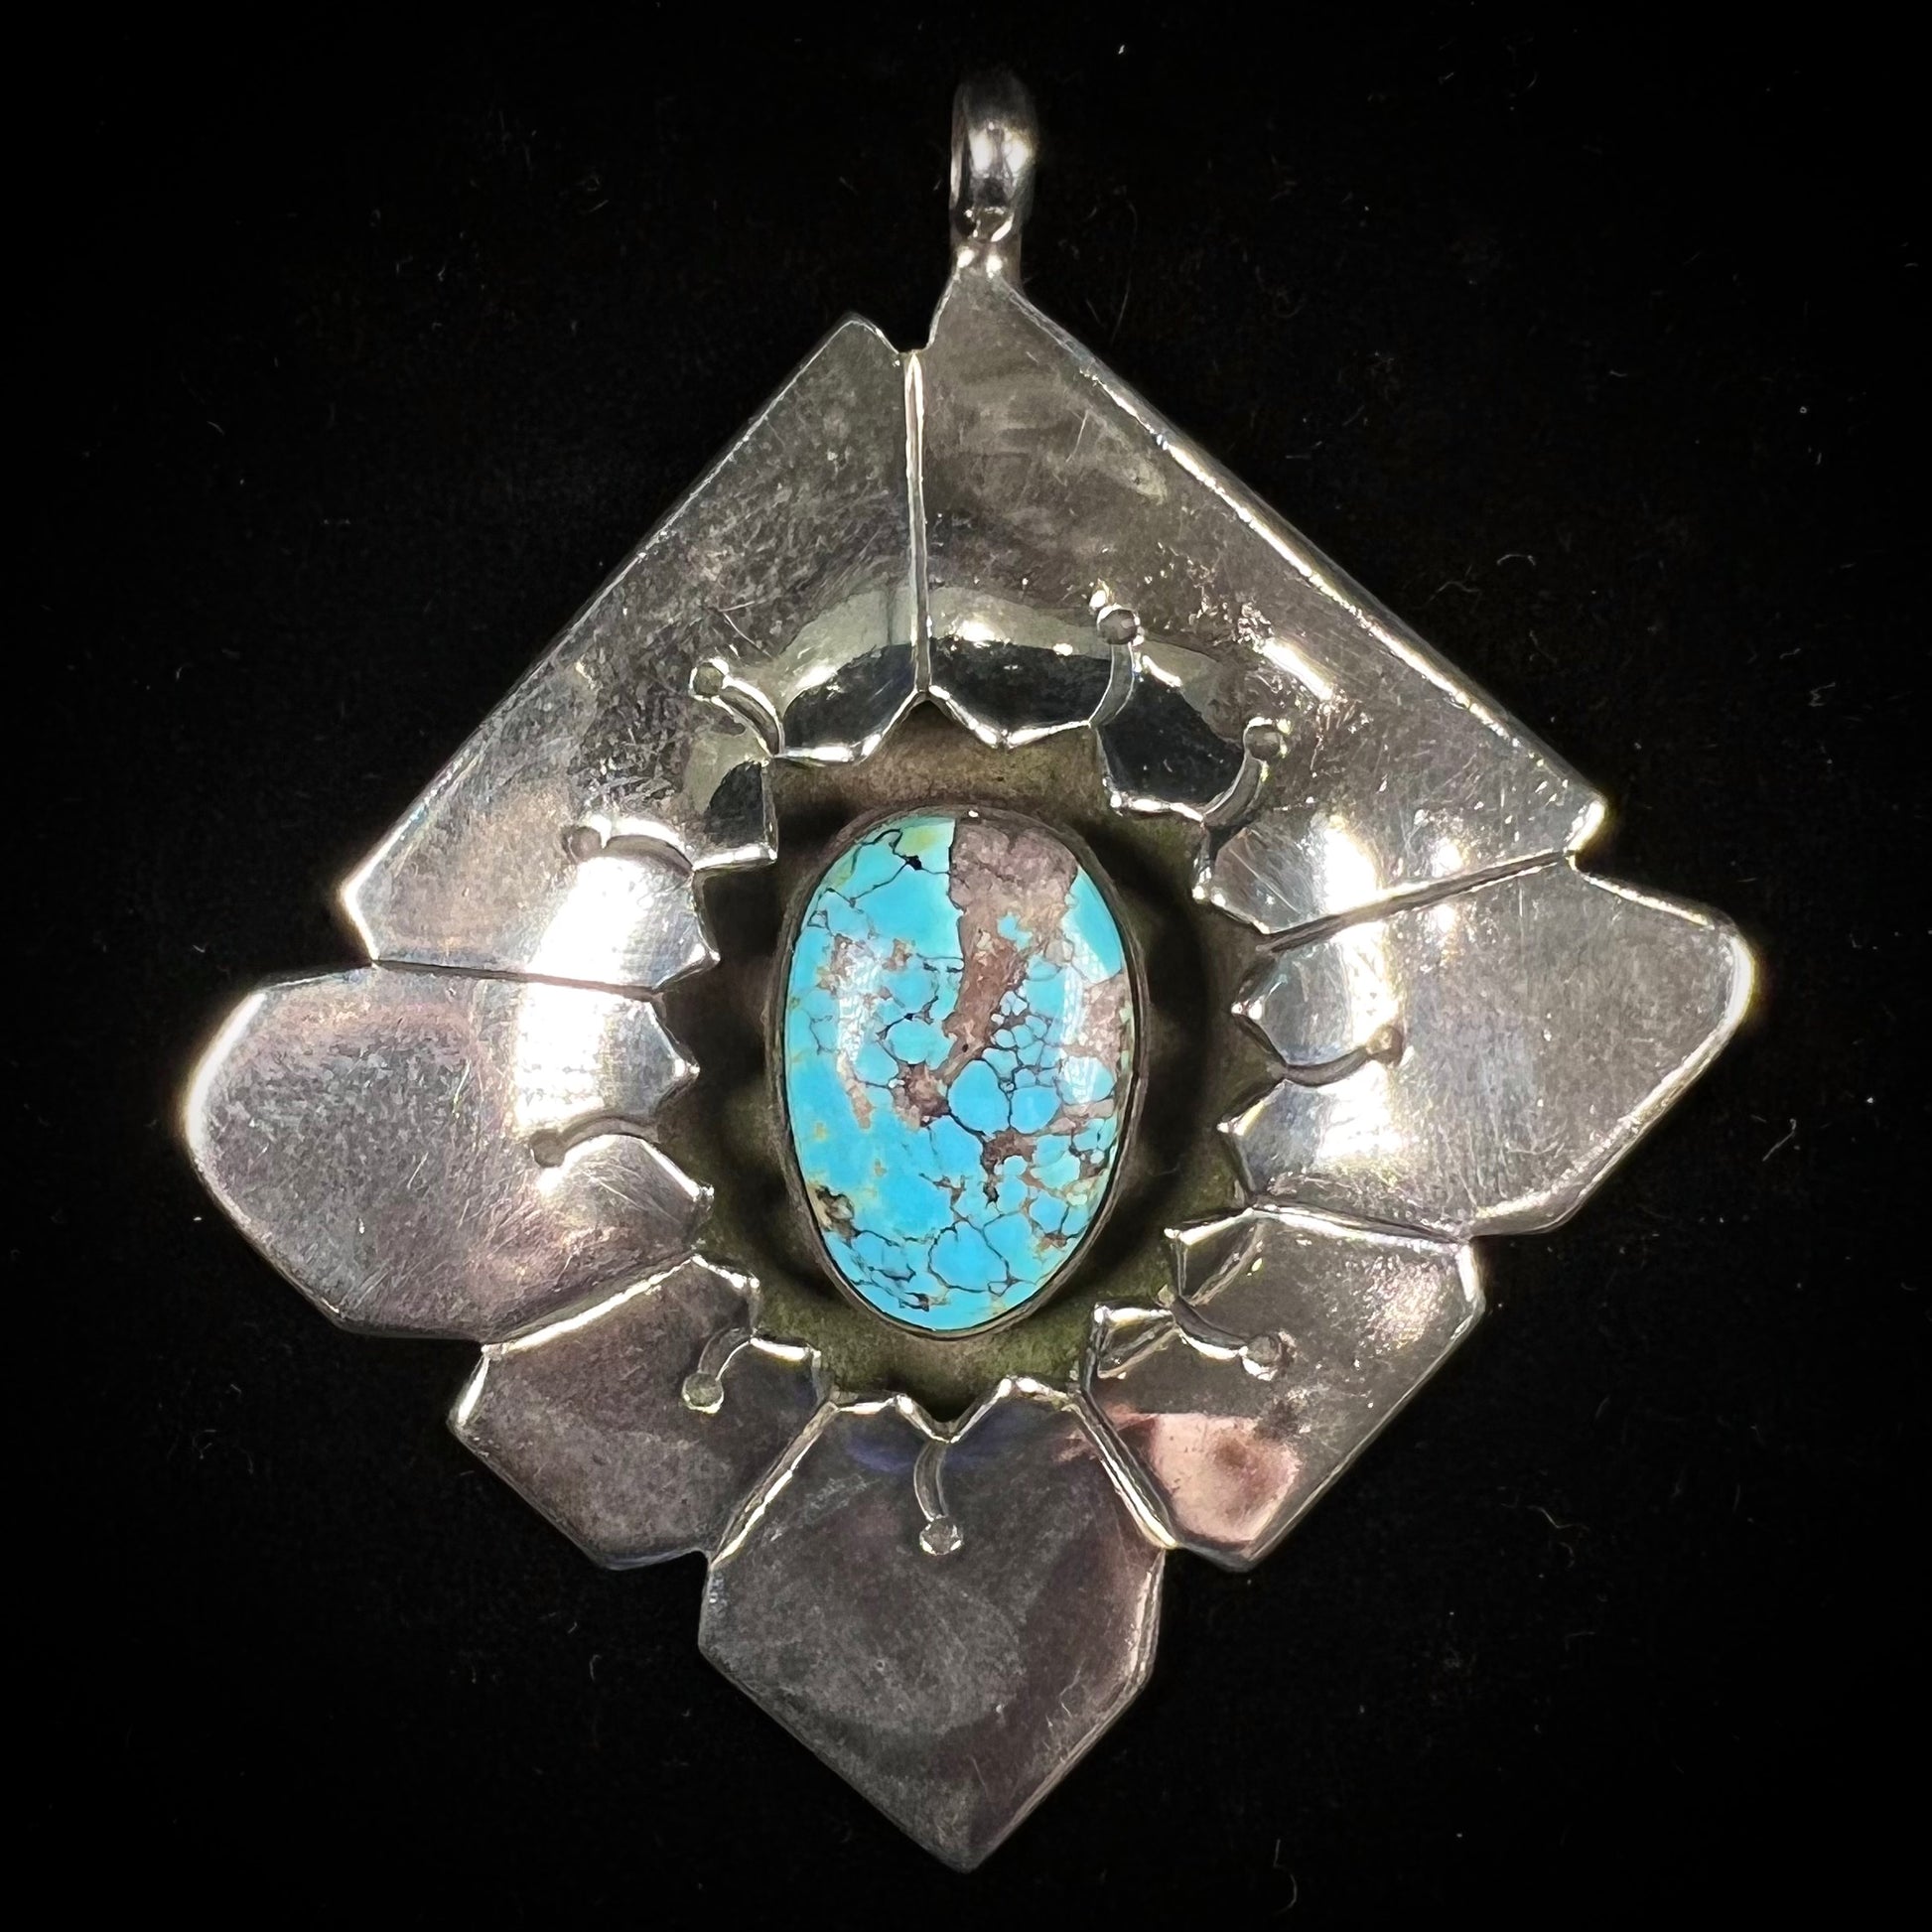 A handmade Mayan Indian pendant set with an oval cut turquoise stone from the Number 8 Mine.